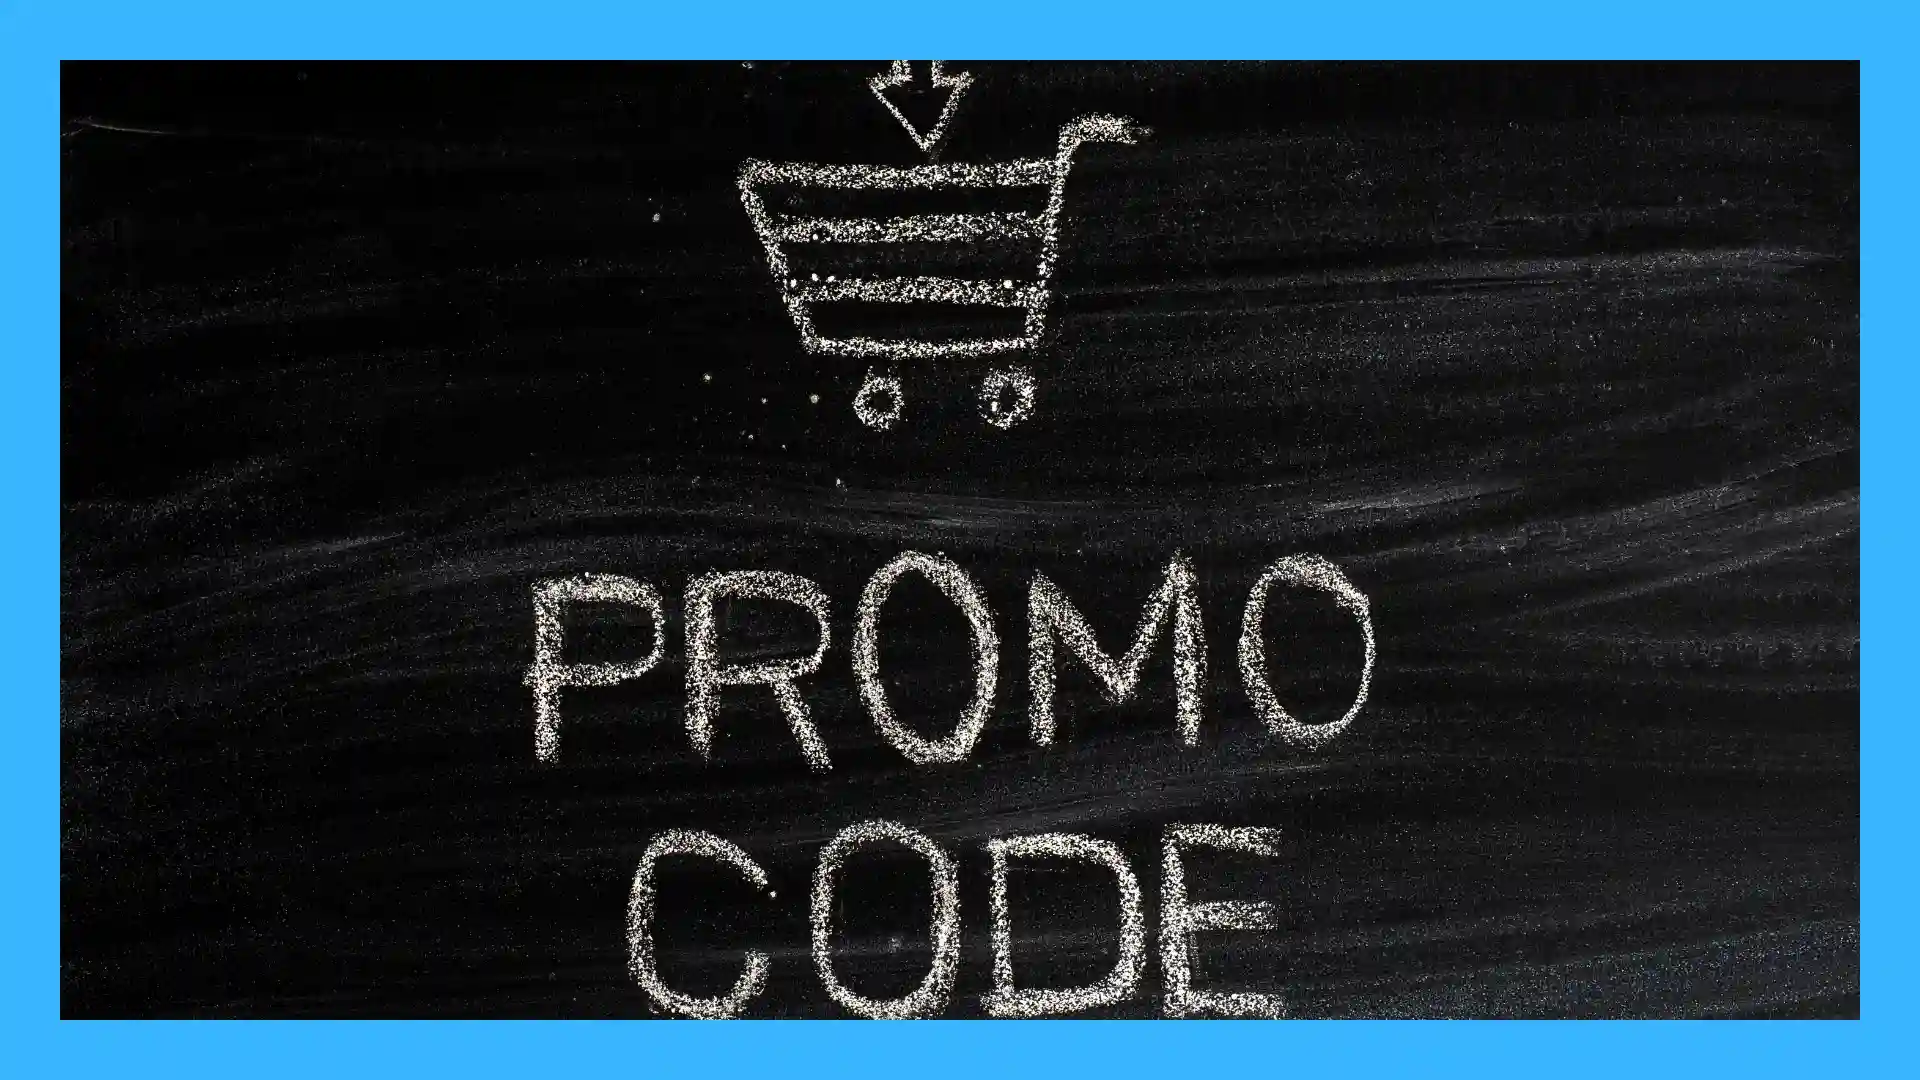 You can redeem promo codes for many different reasons